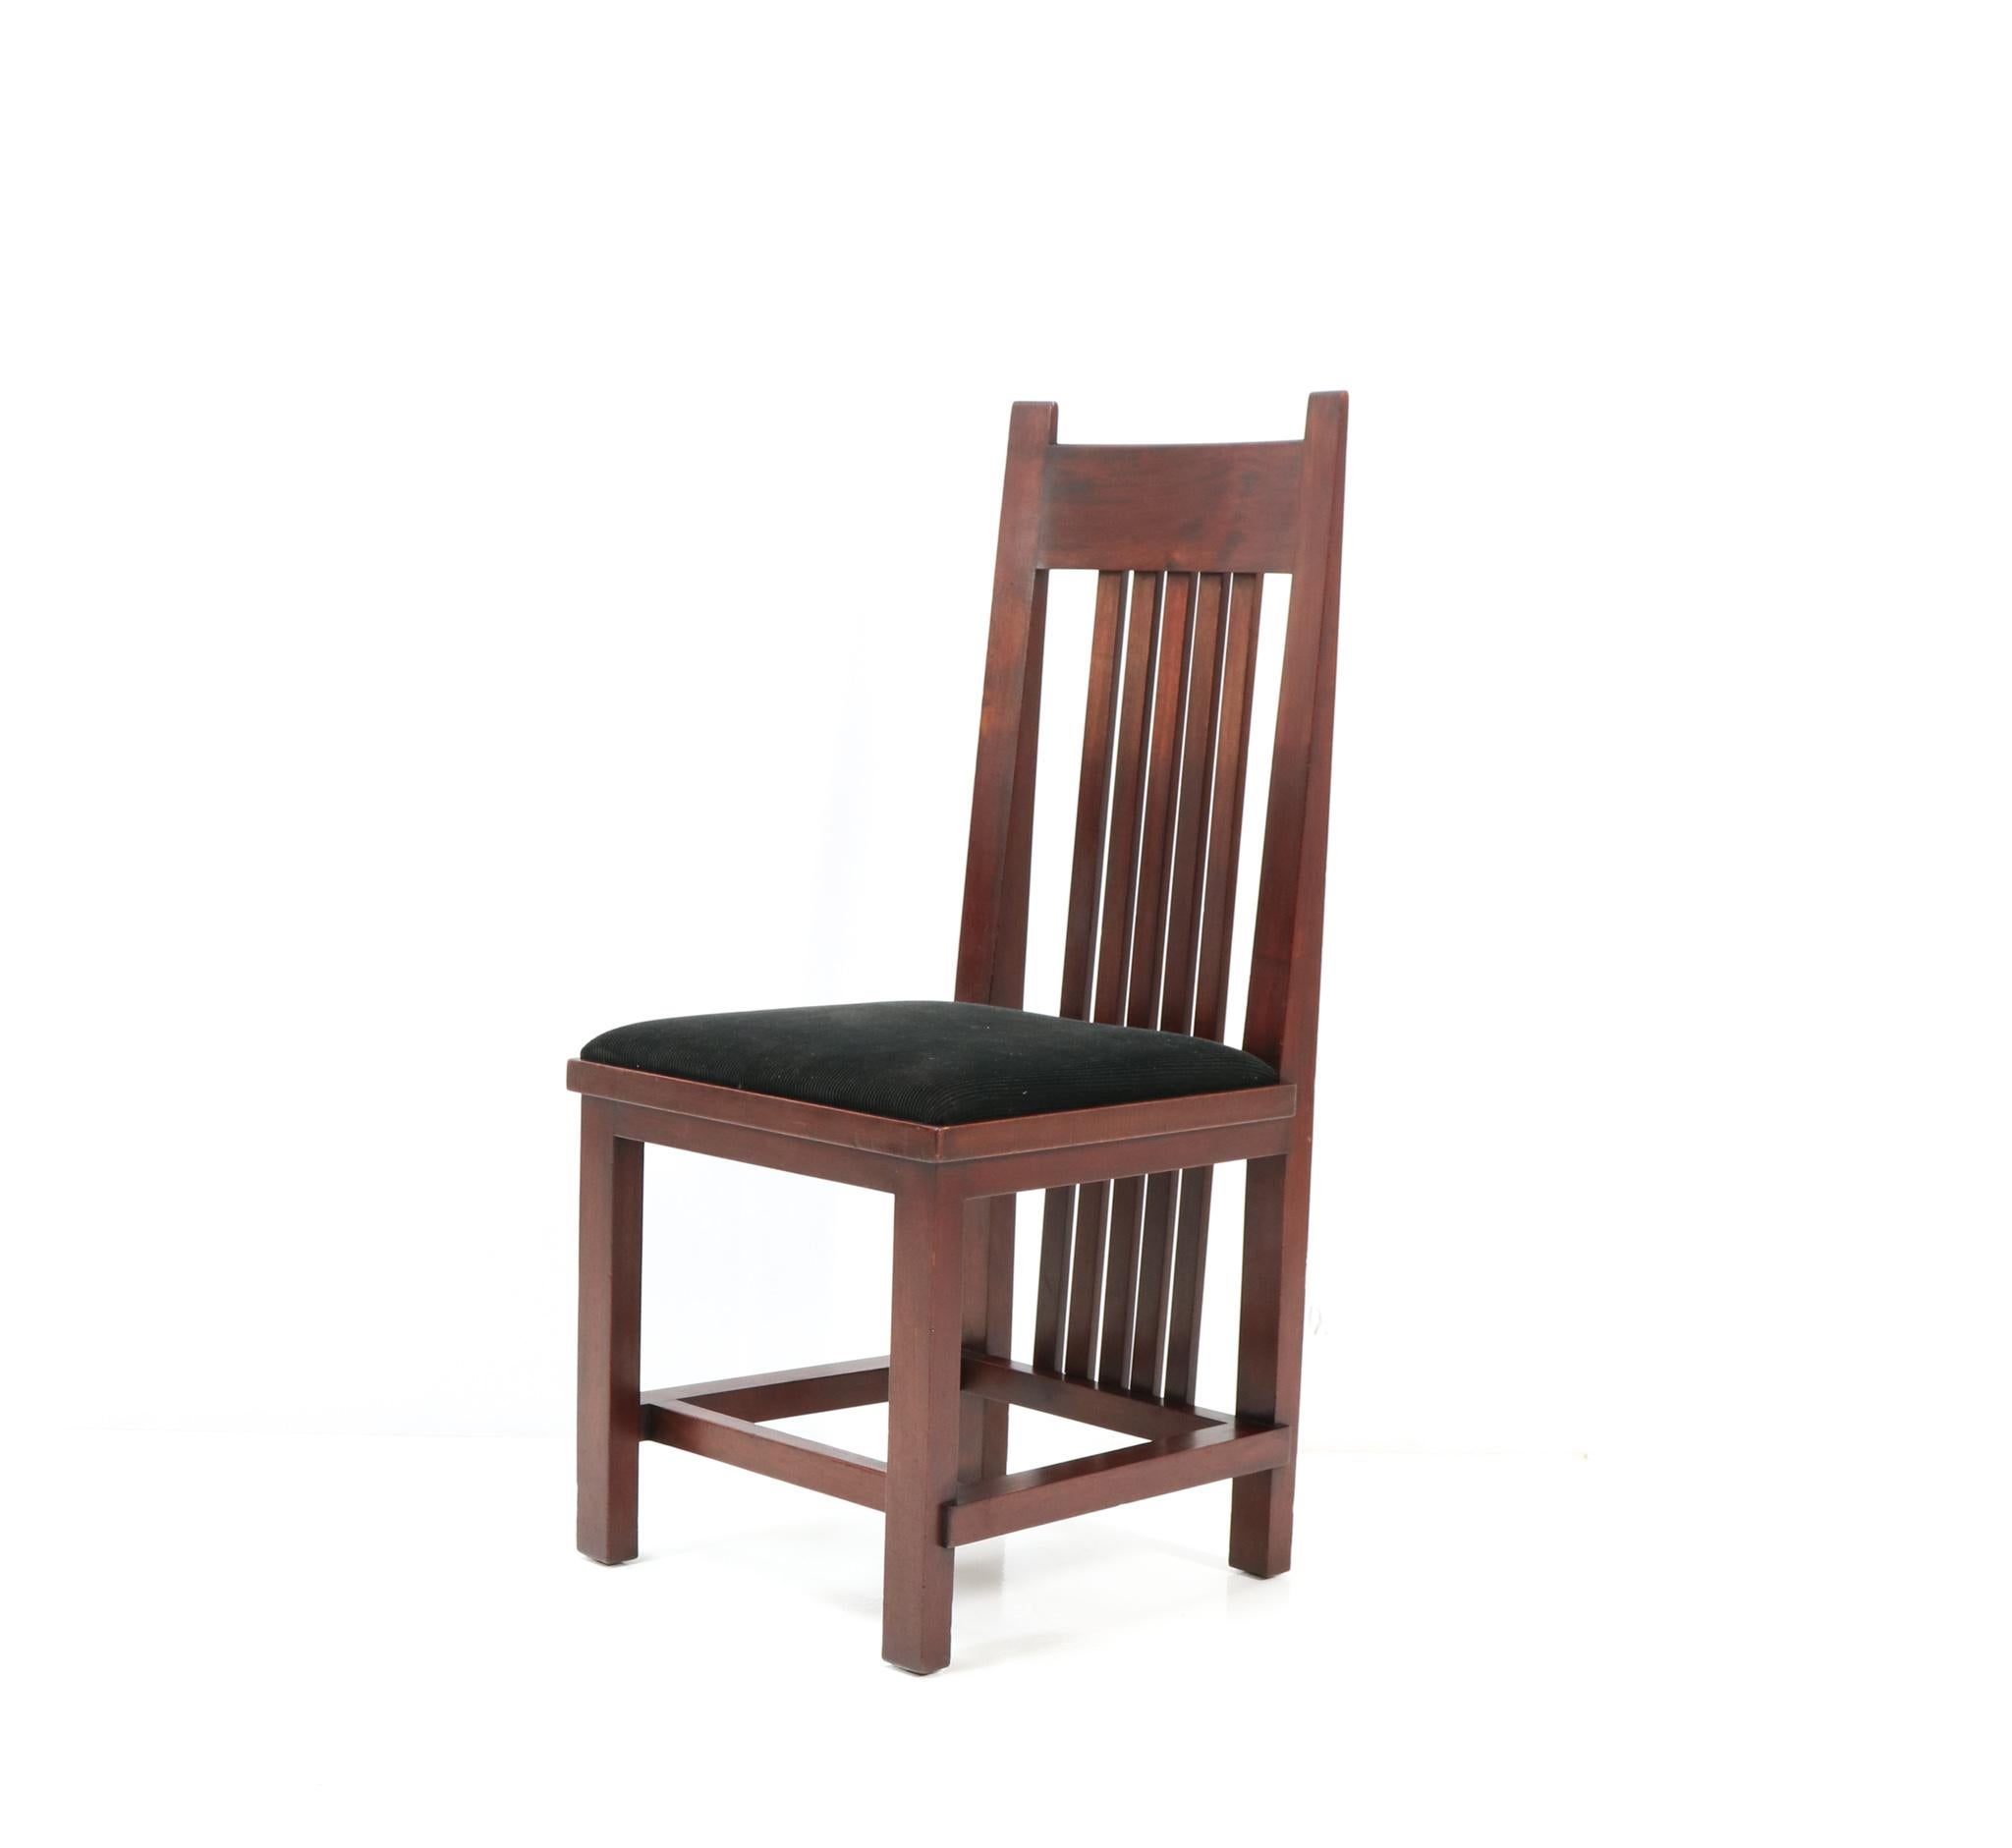 Dutch Mahogany Art Deco Modernist High Back Chair by Hendrik Wouda for Pander, 1924 For Sale